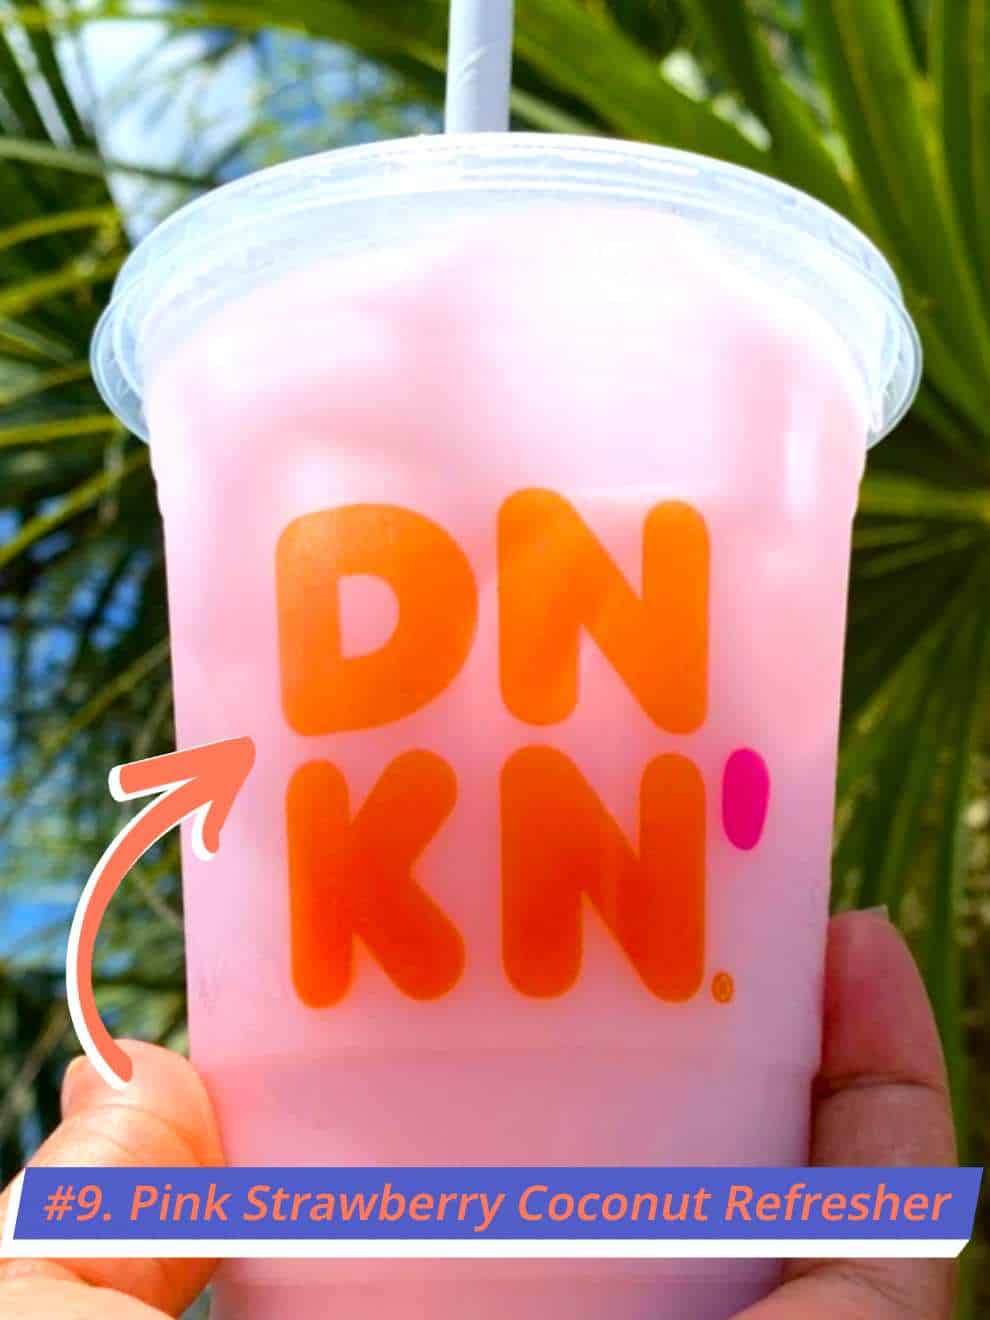 Dunkin Donuts Strawberry Coconut Refresher